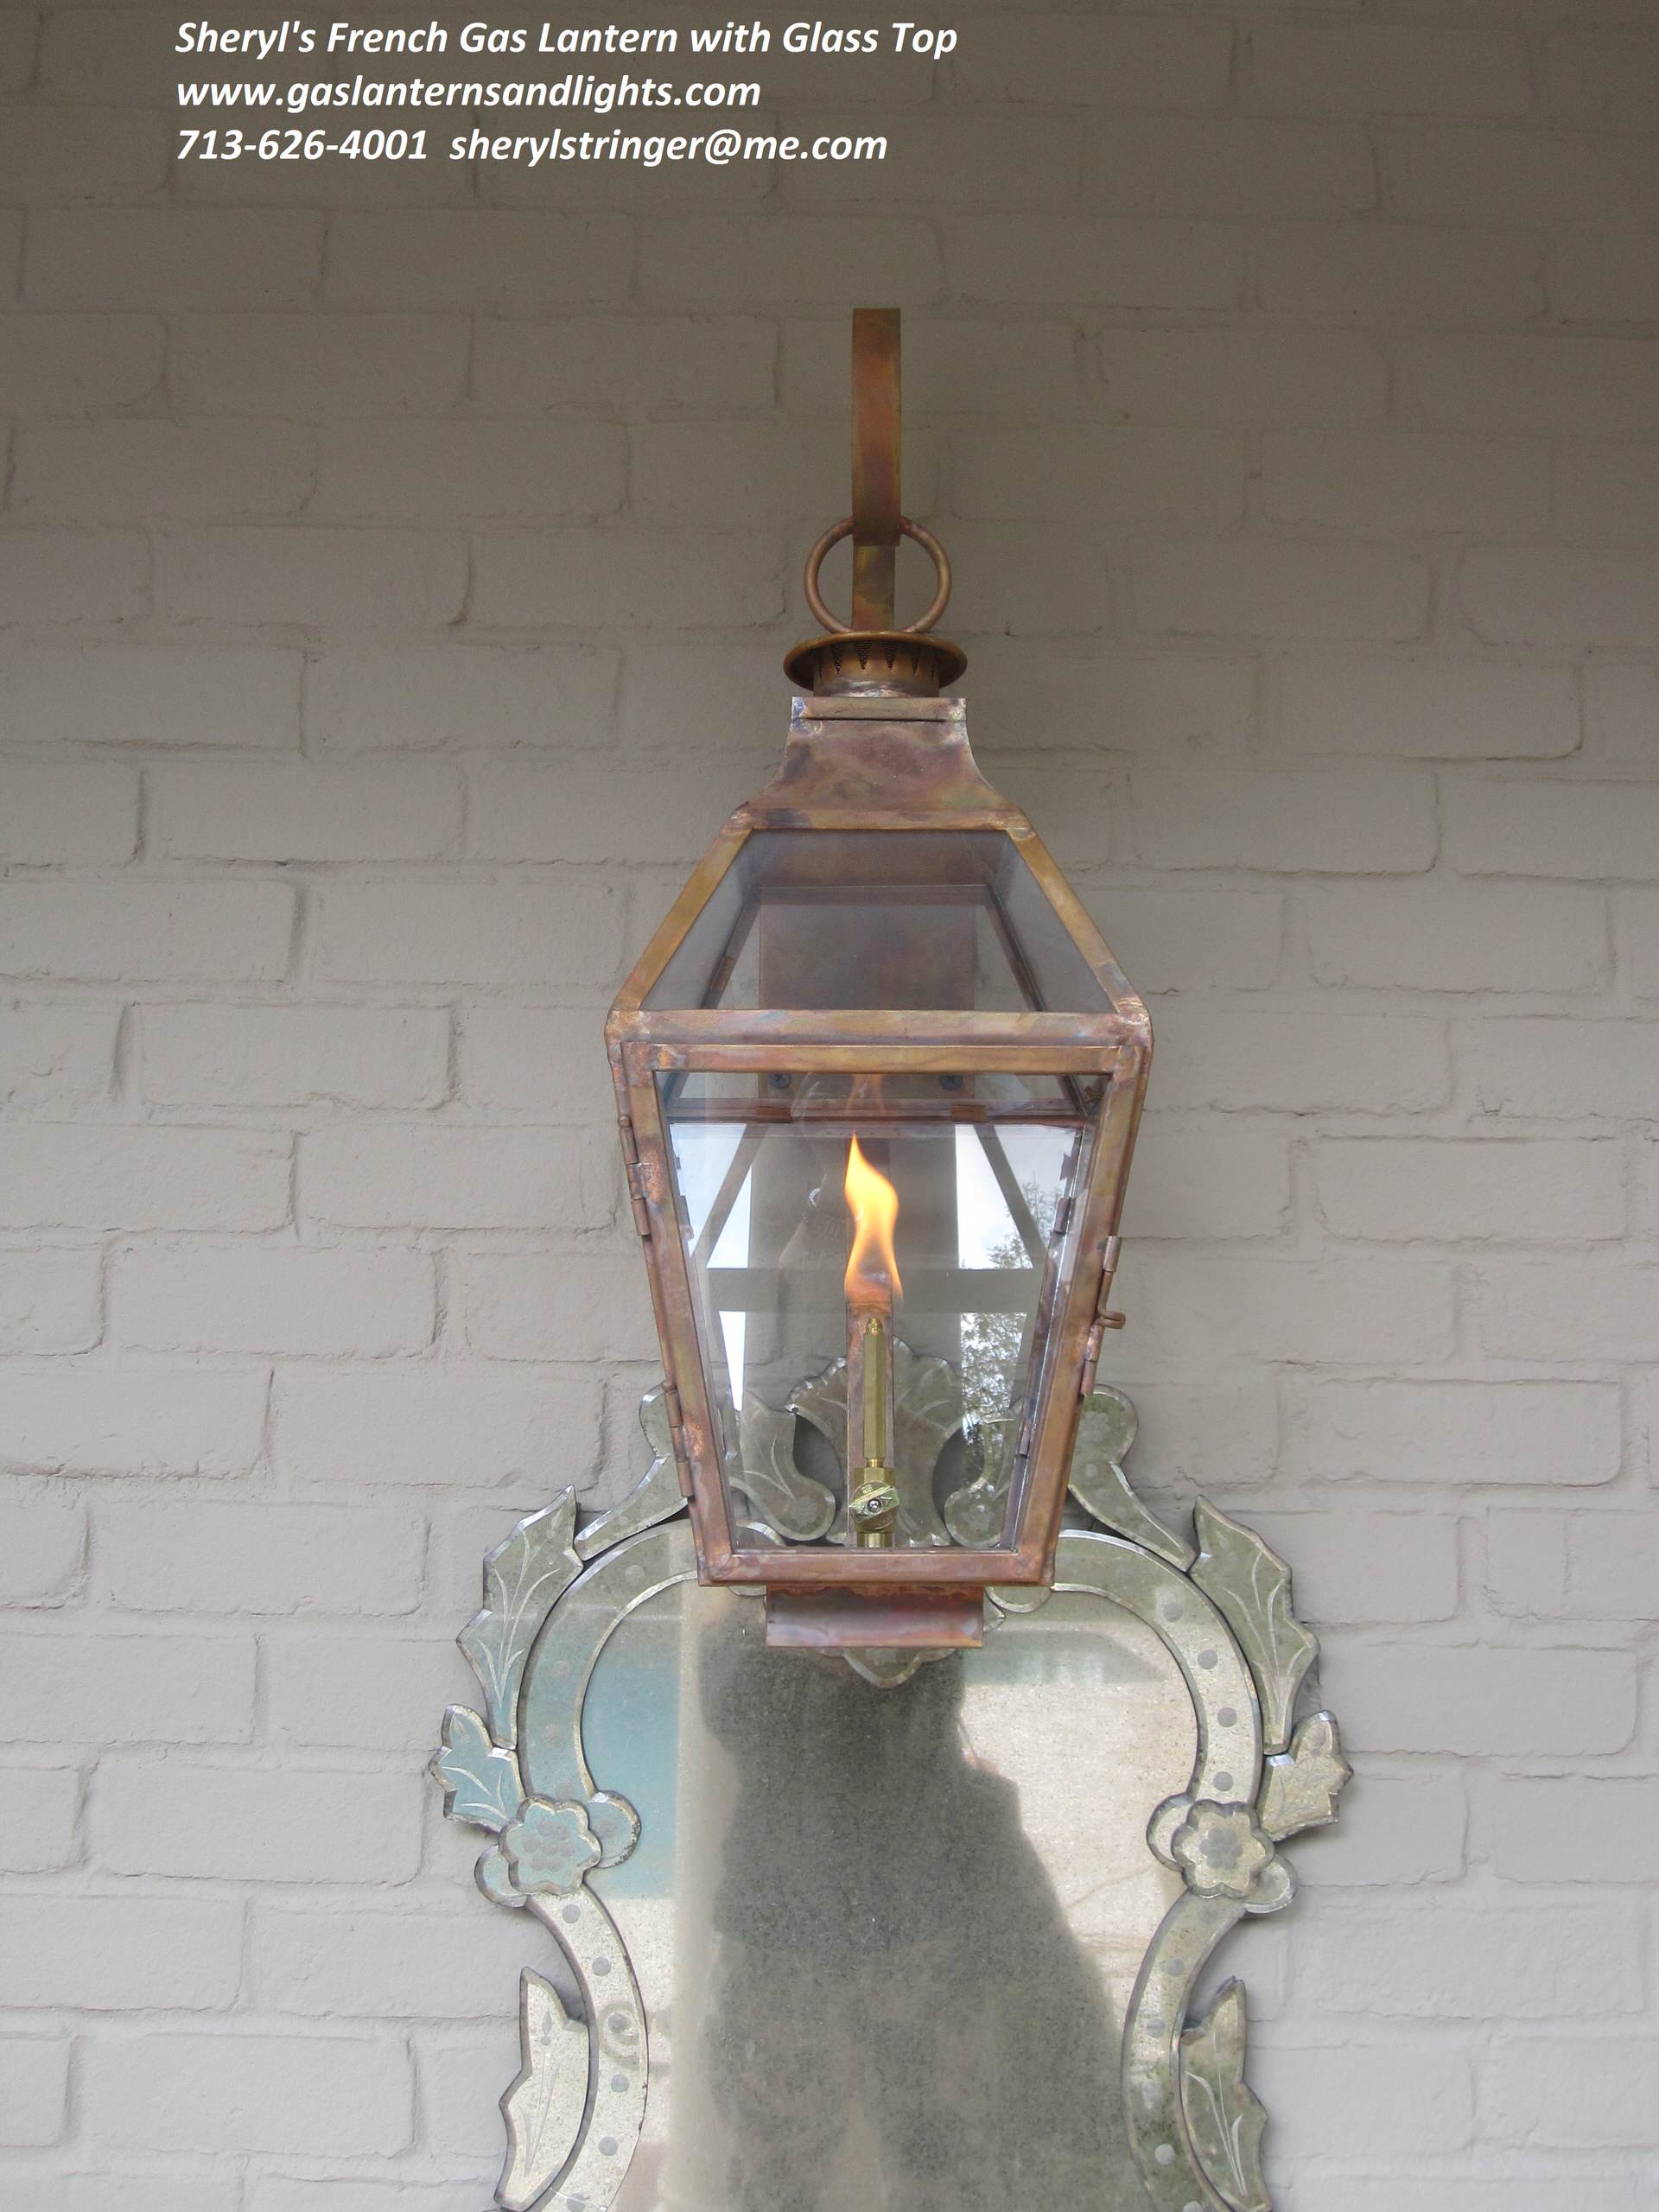 Sheryl's French Style Lanterns with Glass Tops